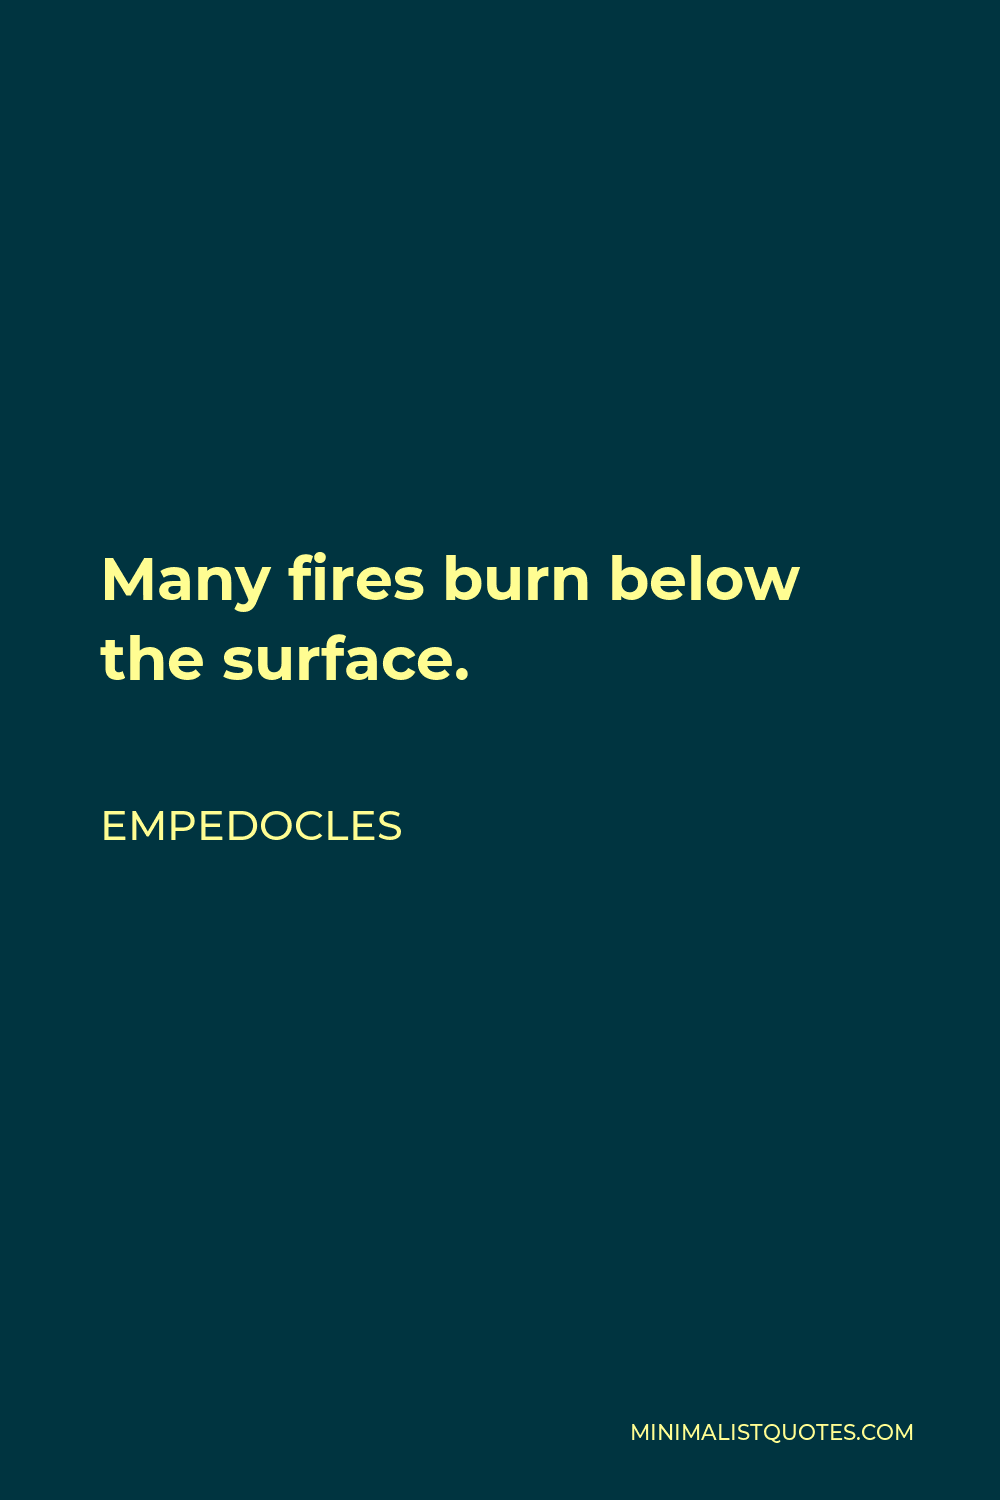 Empedocles Quote - Many fires burn below the surface.